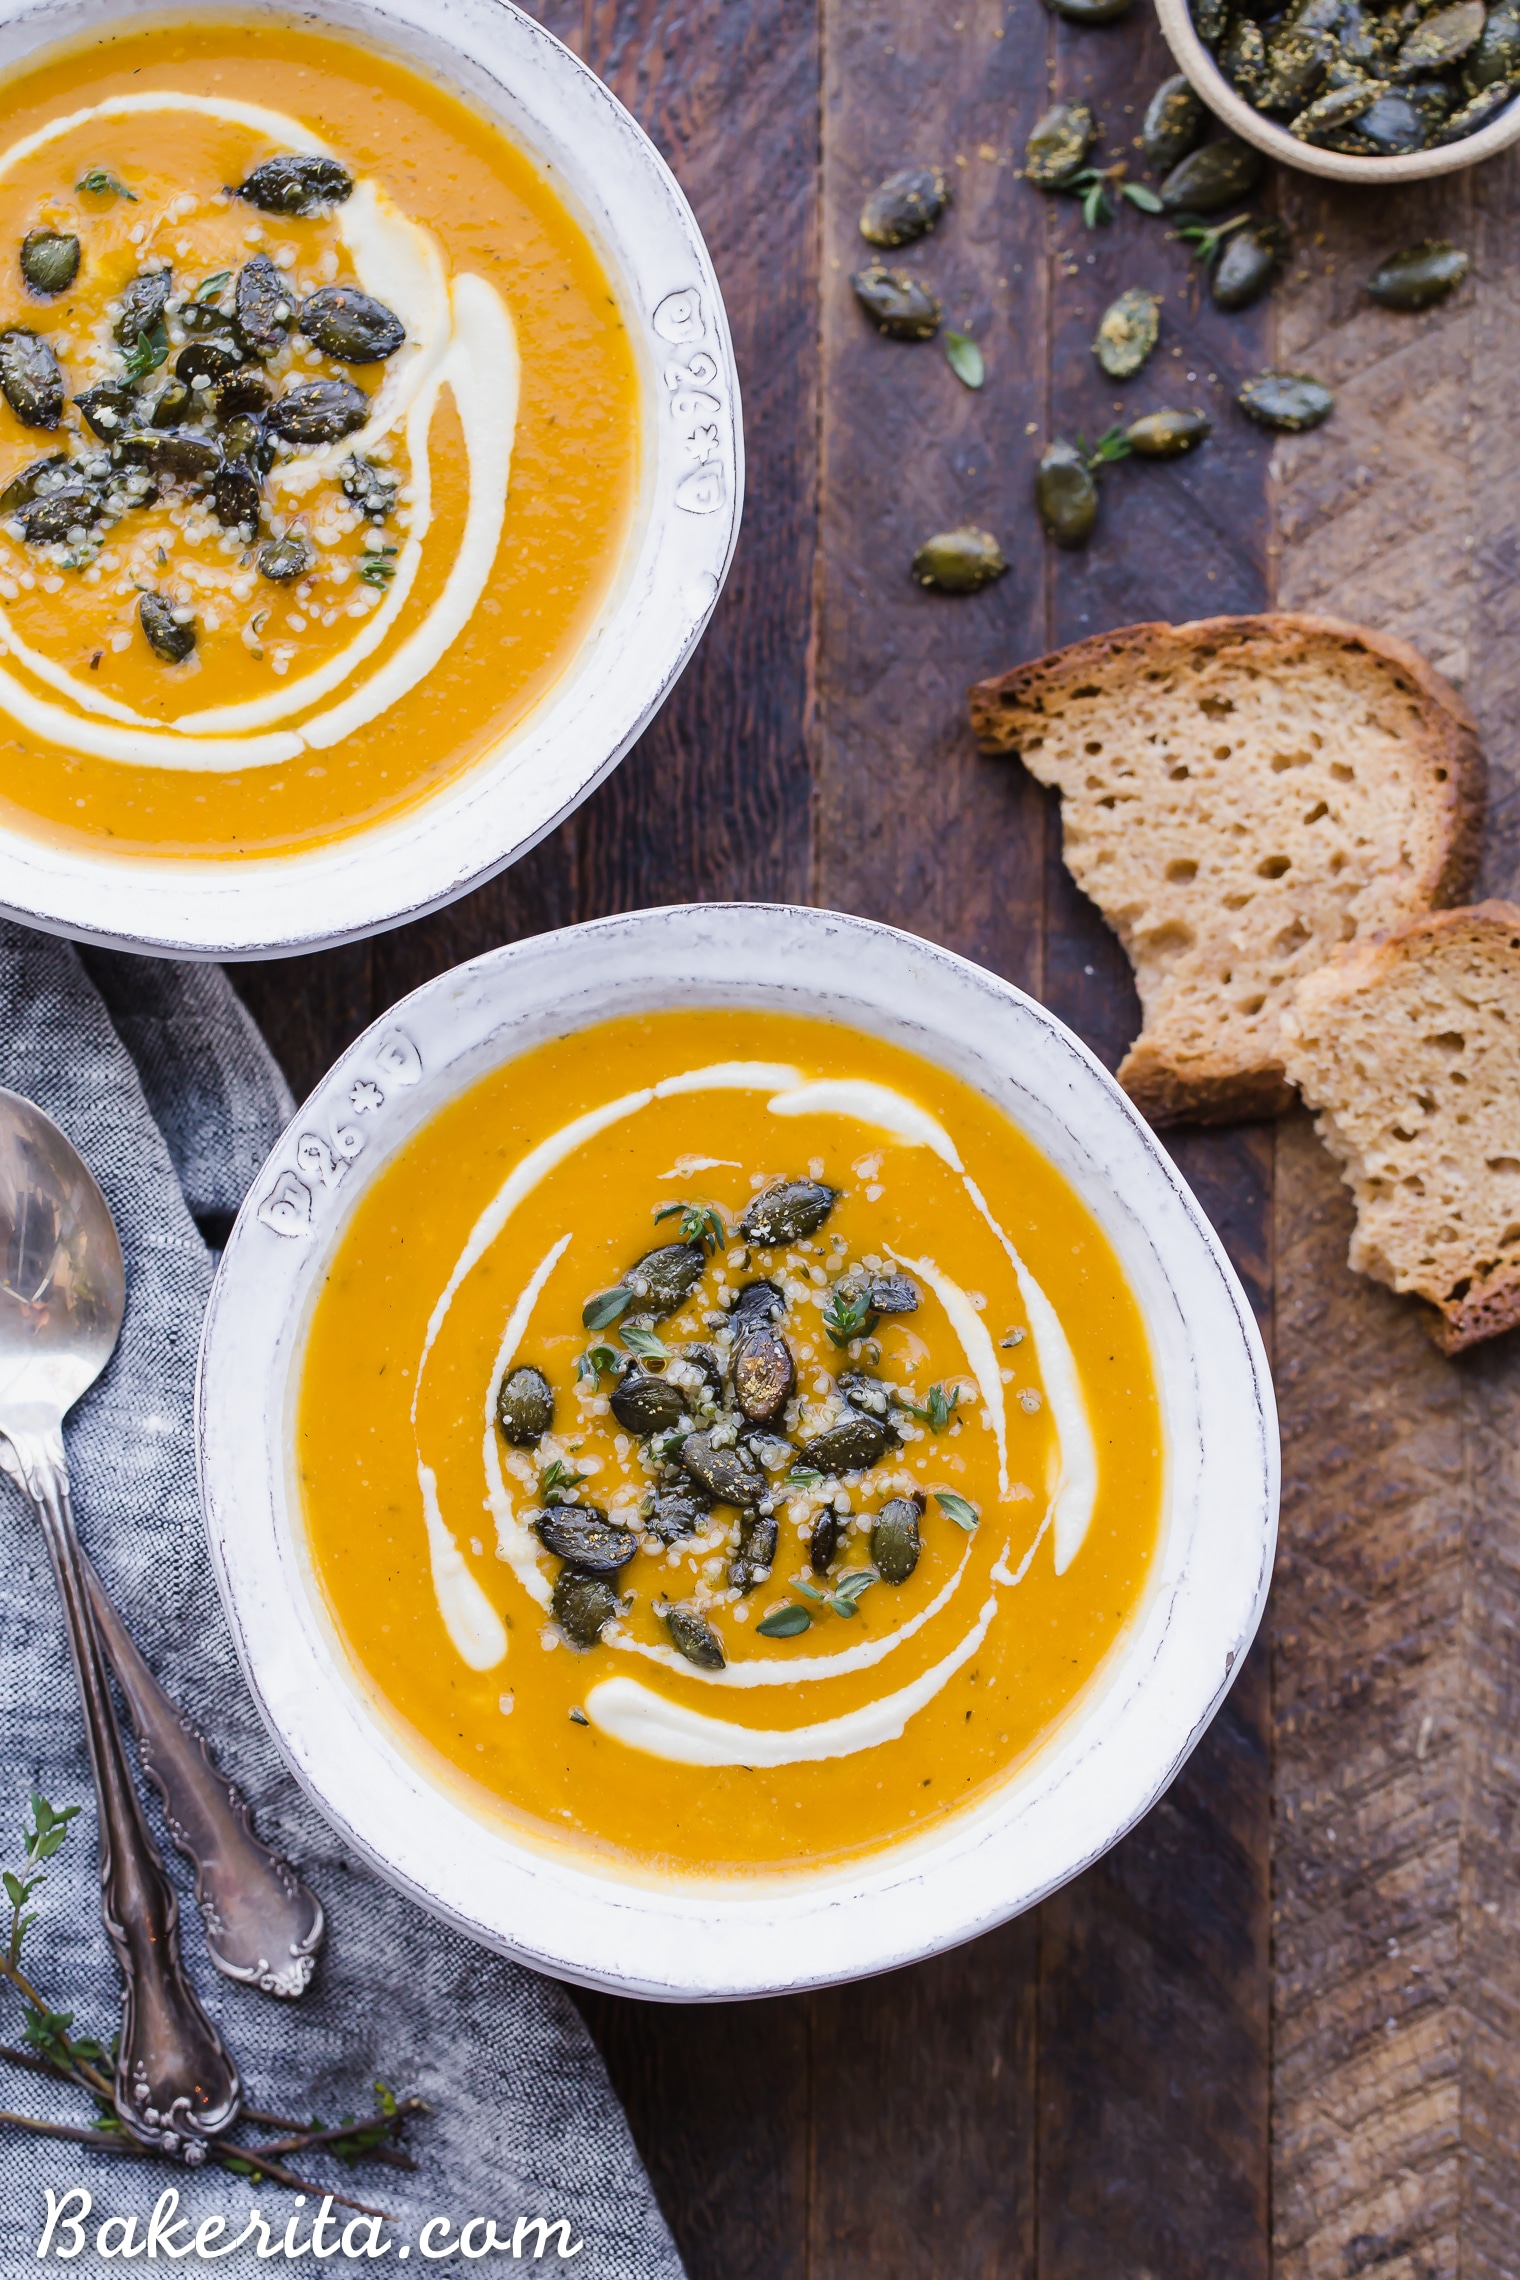 This Butternut Squash Soup is smooth, brightly flavored, and swirled with an easy cashew cream. It's topped off with crunchy spiced pumpkin seeds. This paleo and vegan soup is perfect for chilly days and best served with some crusty gluten-free bread!